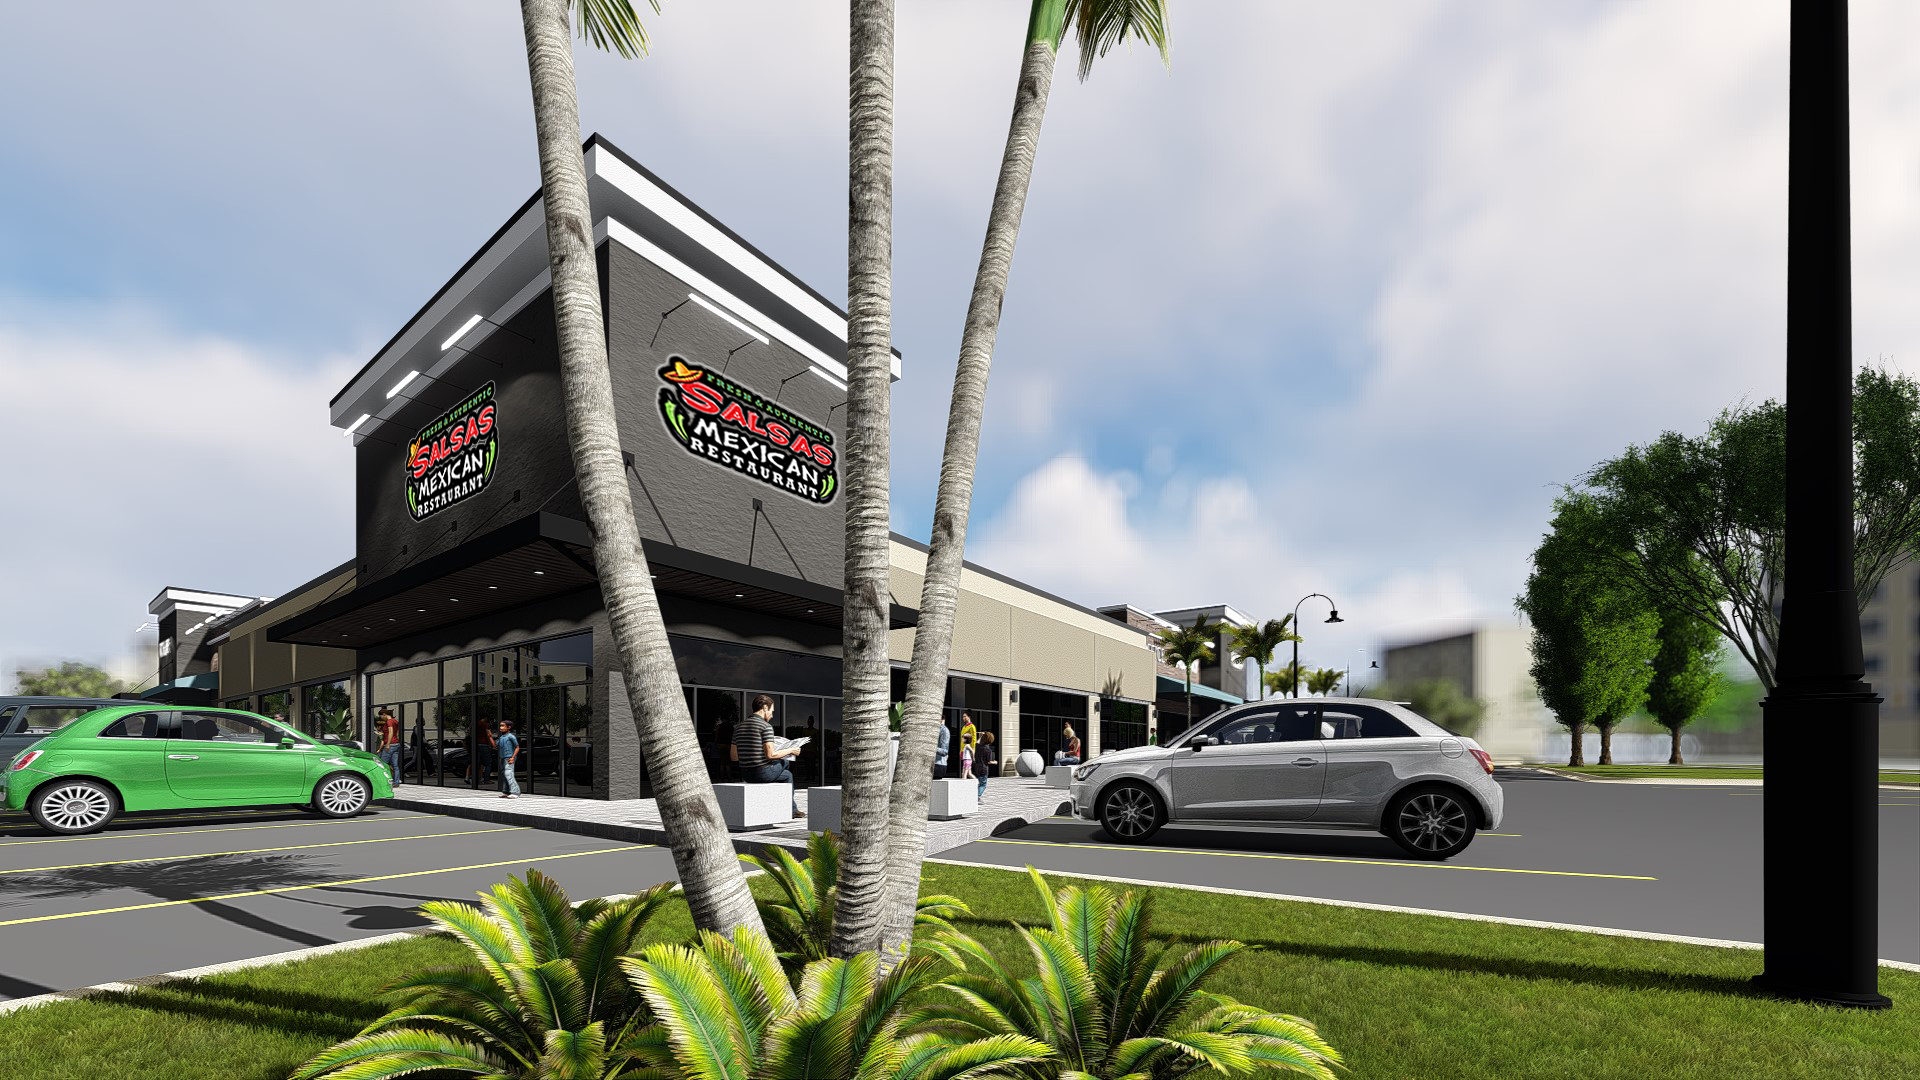 Salsas Mexican Restaurant will anchor Bay95, a neighborhood retail center that will be developed at 8738 Baymeadows Road E.